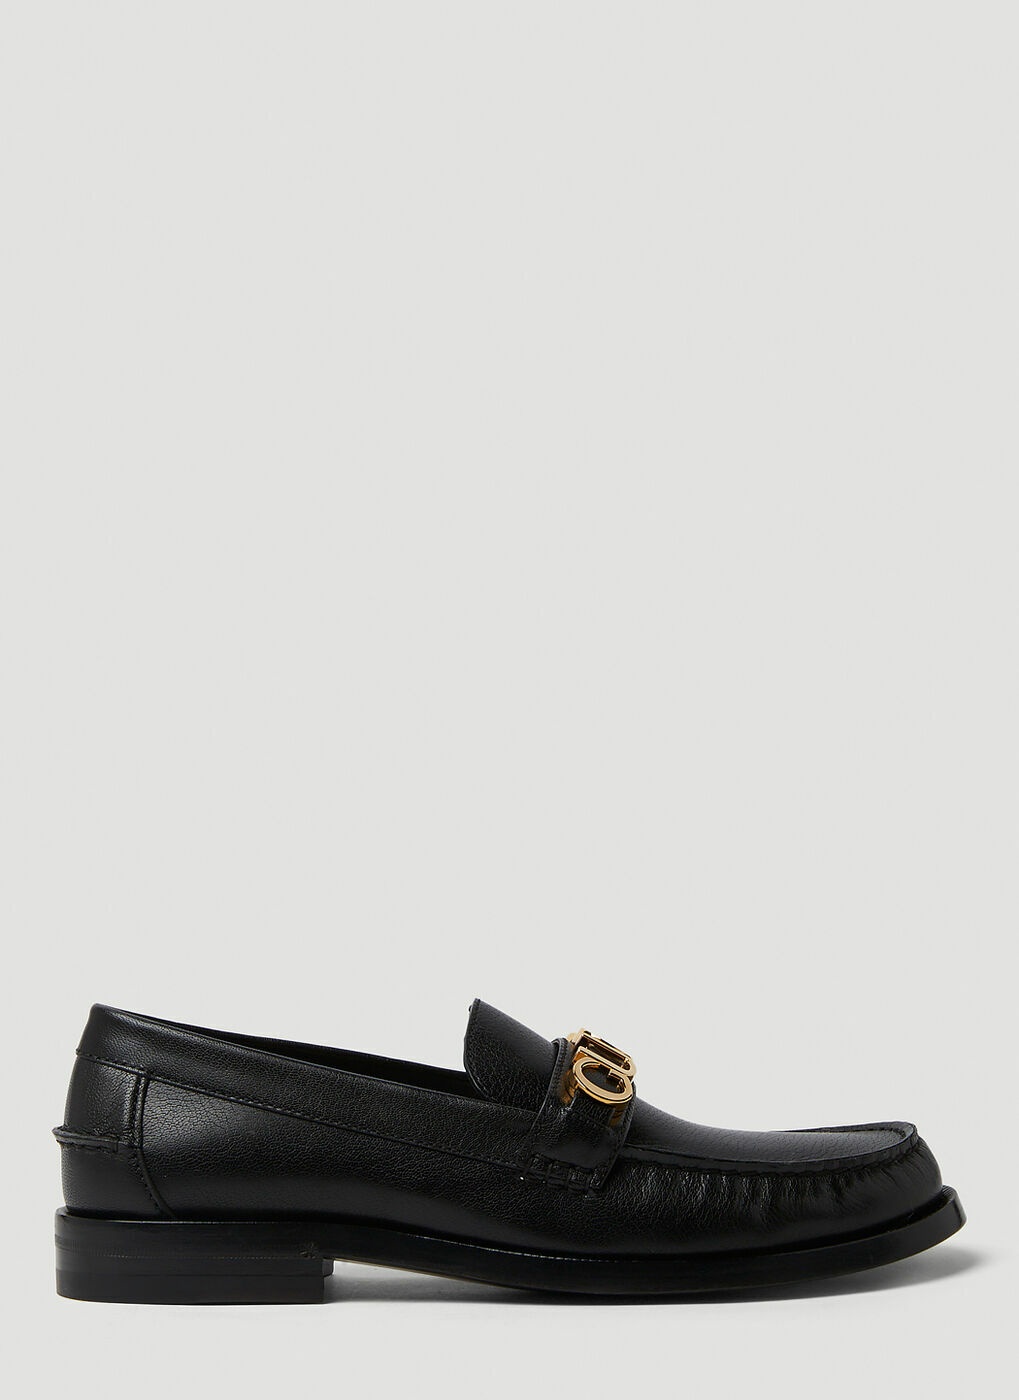 Logo Plaque Loafers in Black Gucci